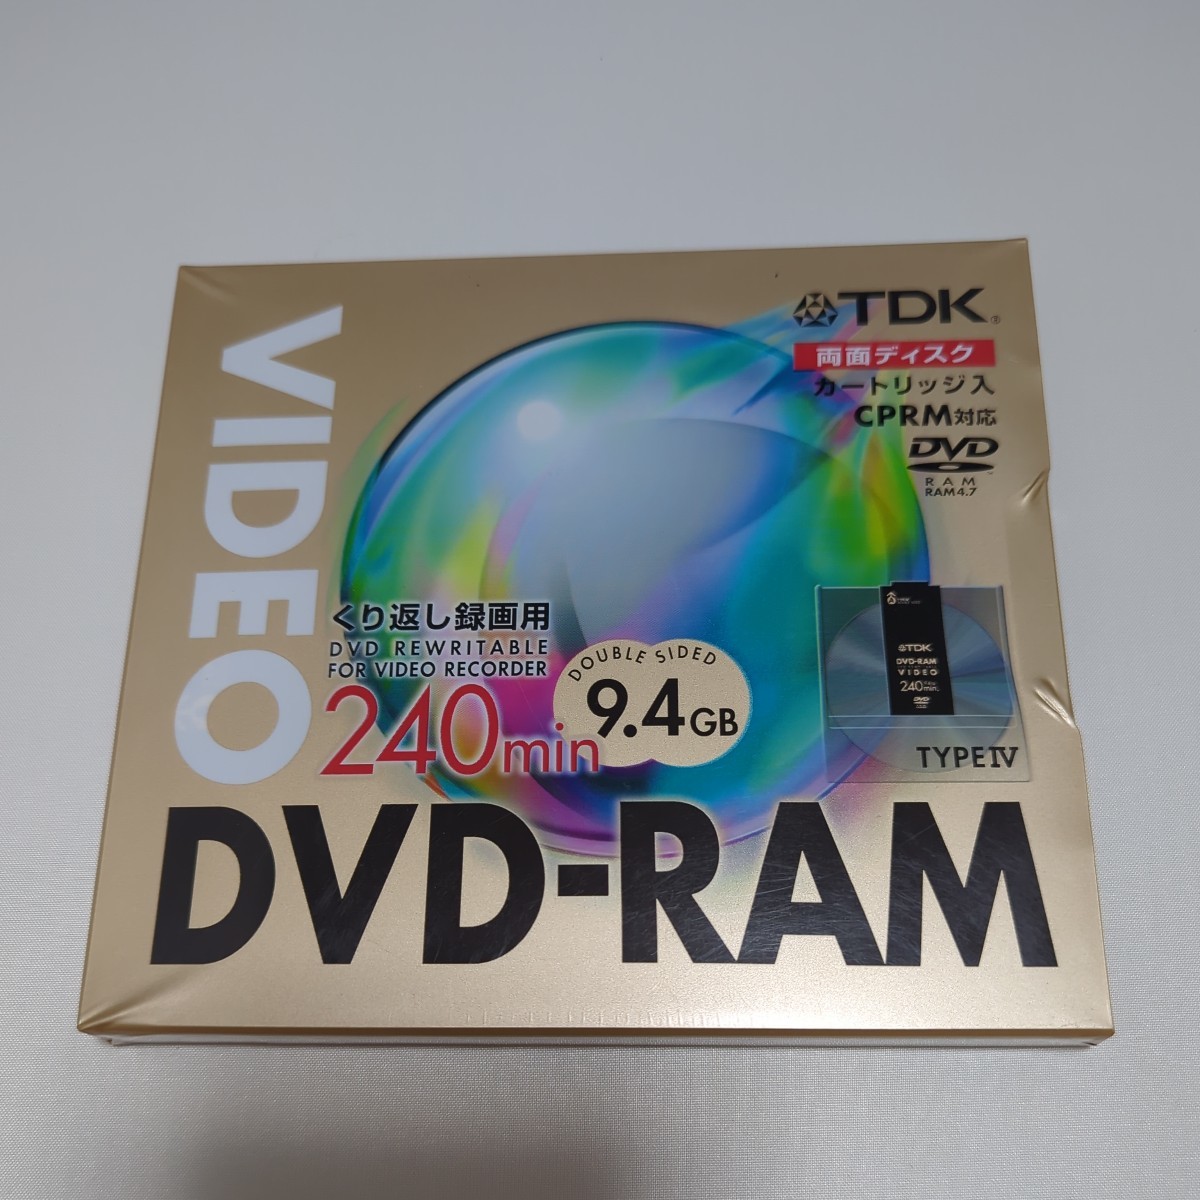  new goods unused famous manufacturer video recording for &PC data for DVD-RAM(9.4GB,4.7GB) total 19 sheets + service goods as breaking the seal ending unused goods 2 sheets = total 21 pieces set 